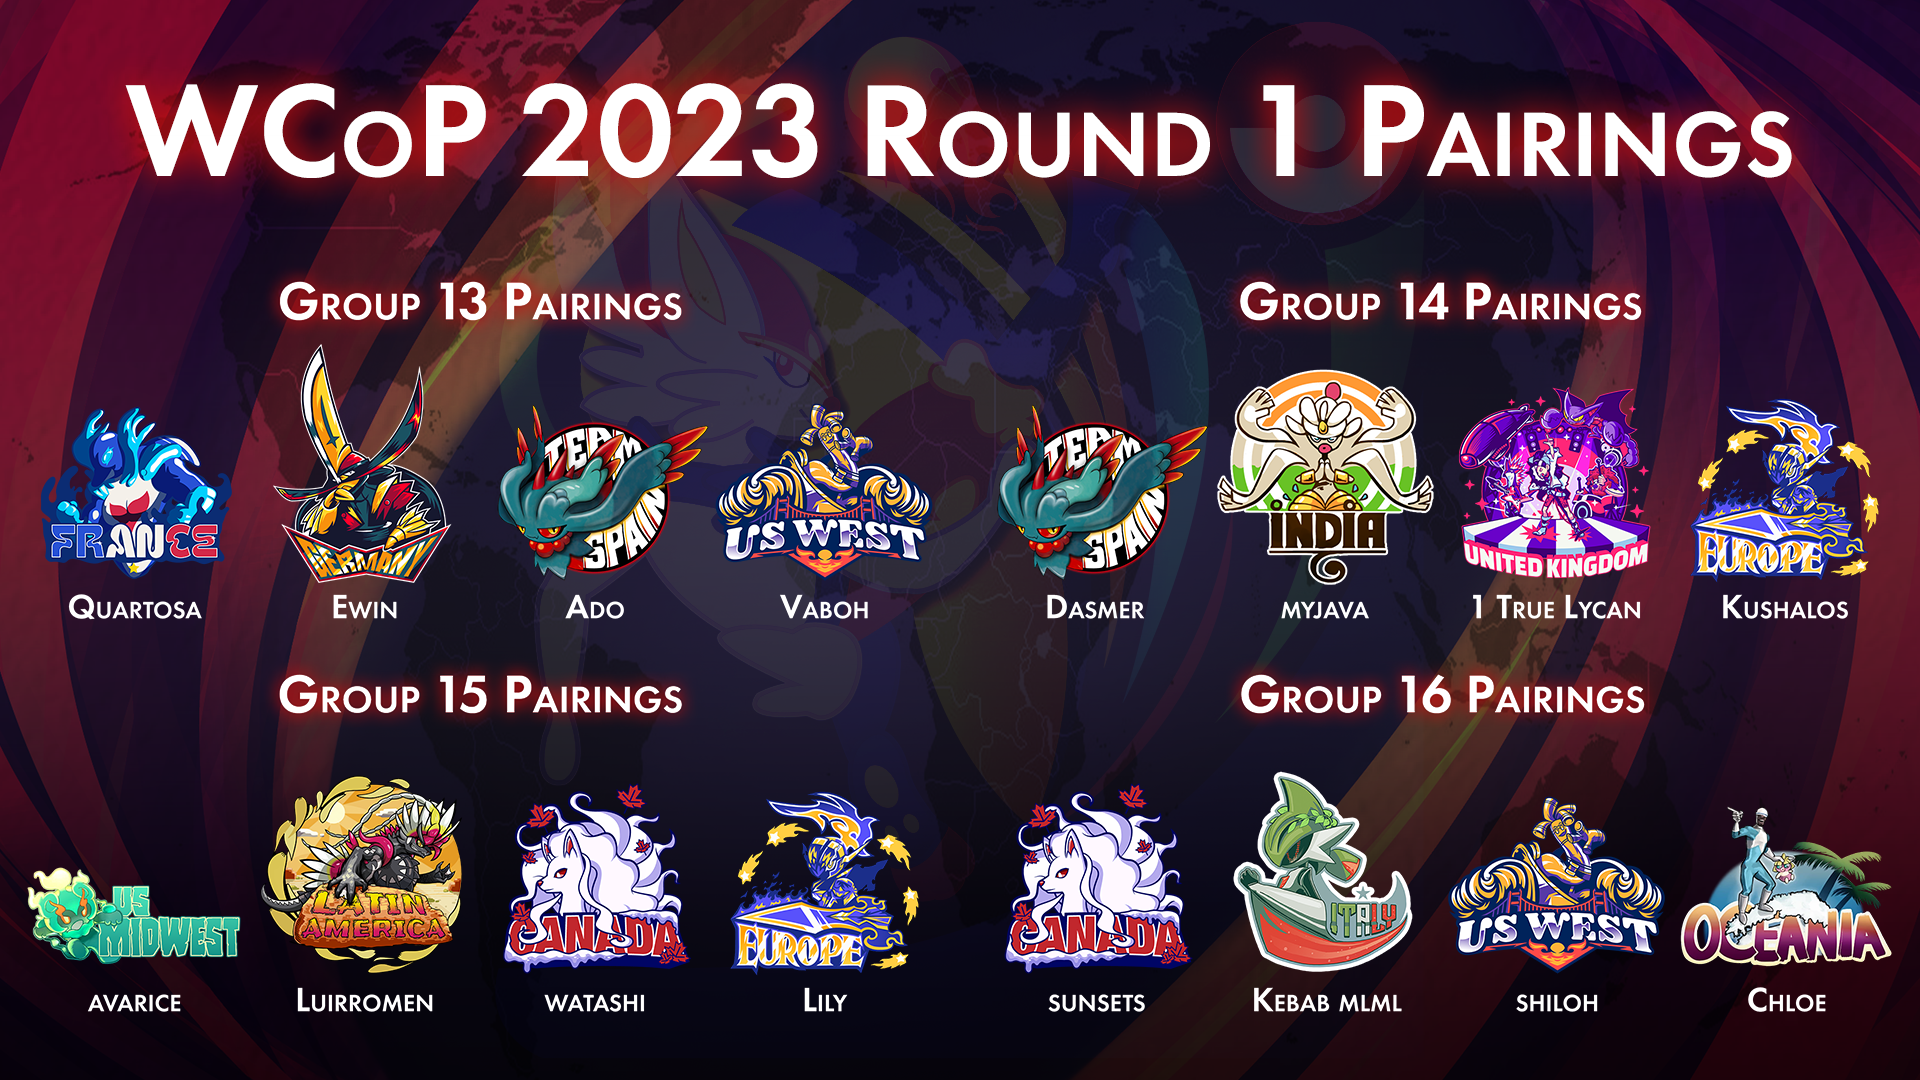 WCoP_2023_Live_Pairings_Group_View_4.png